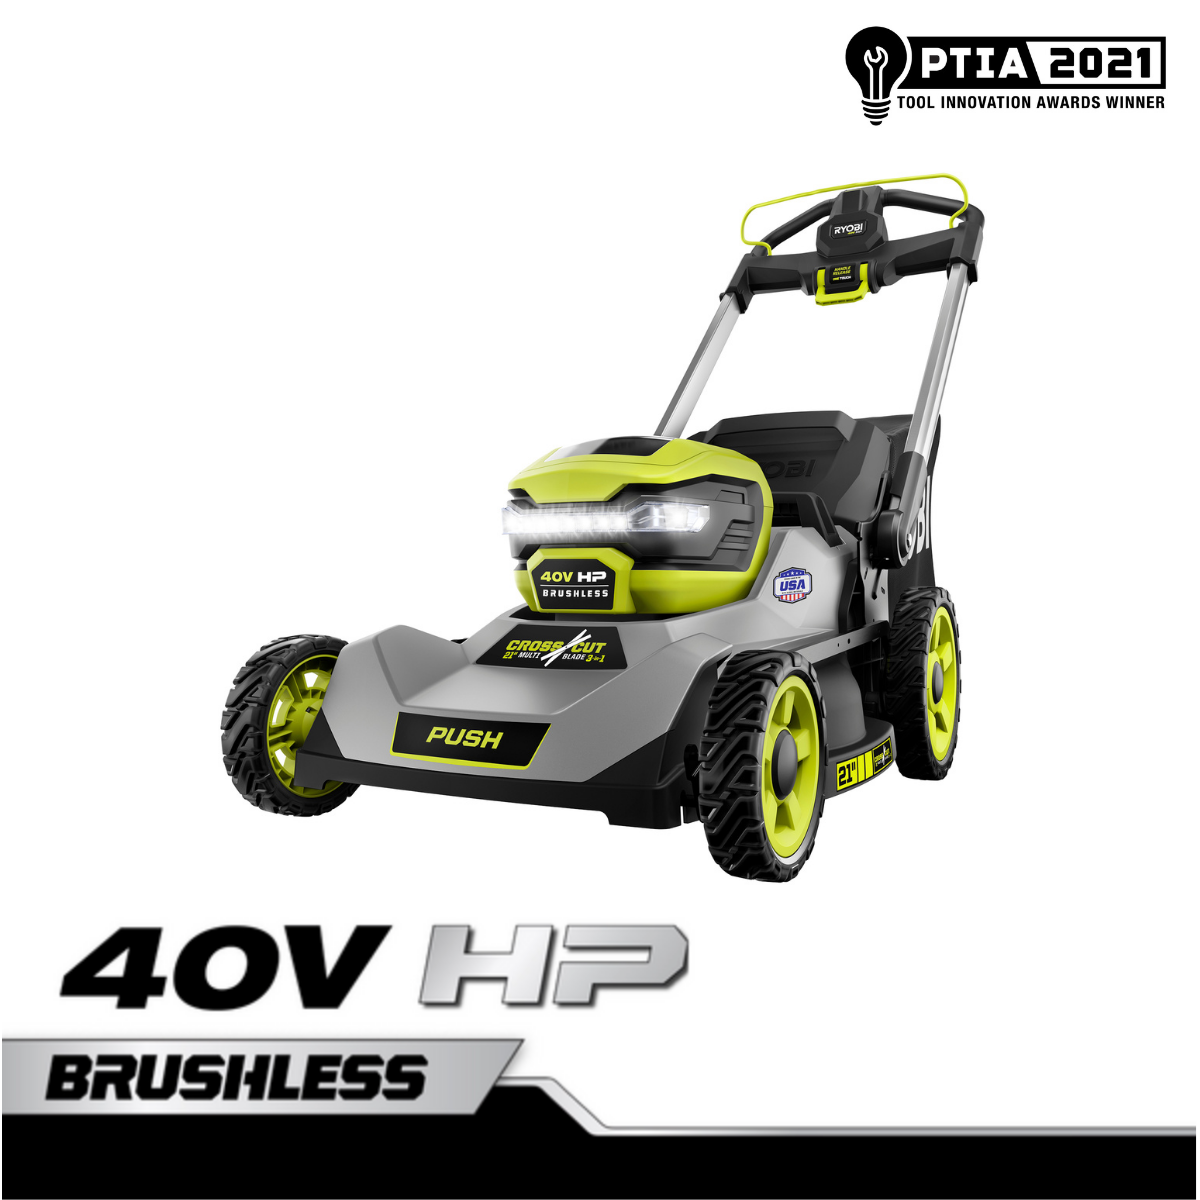 Feature Image for 40V HP BRUSHLESS 21" CROSSCUT PUSH LAWN MOWER KIT.